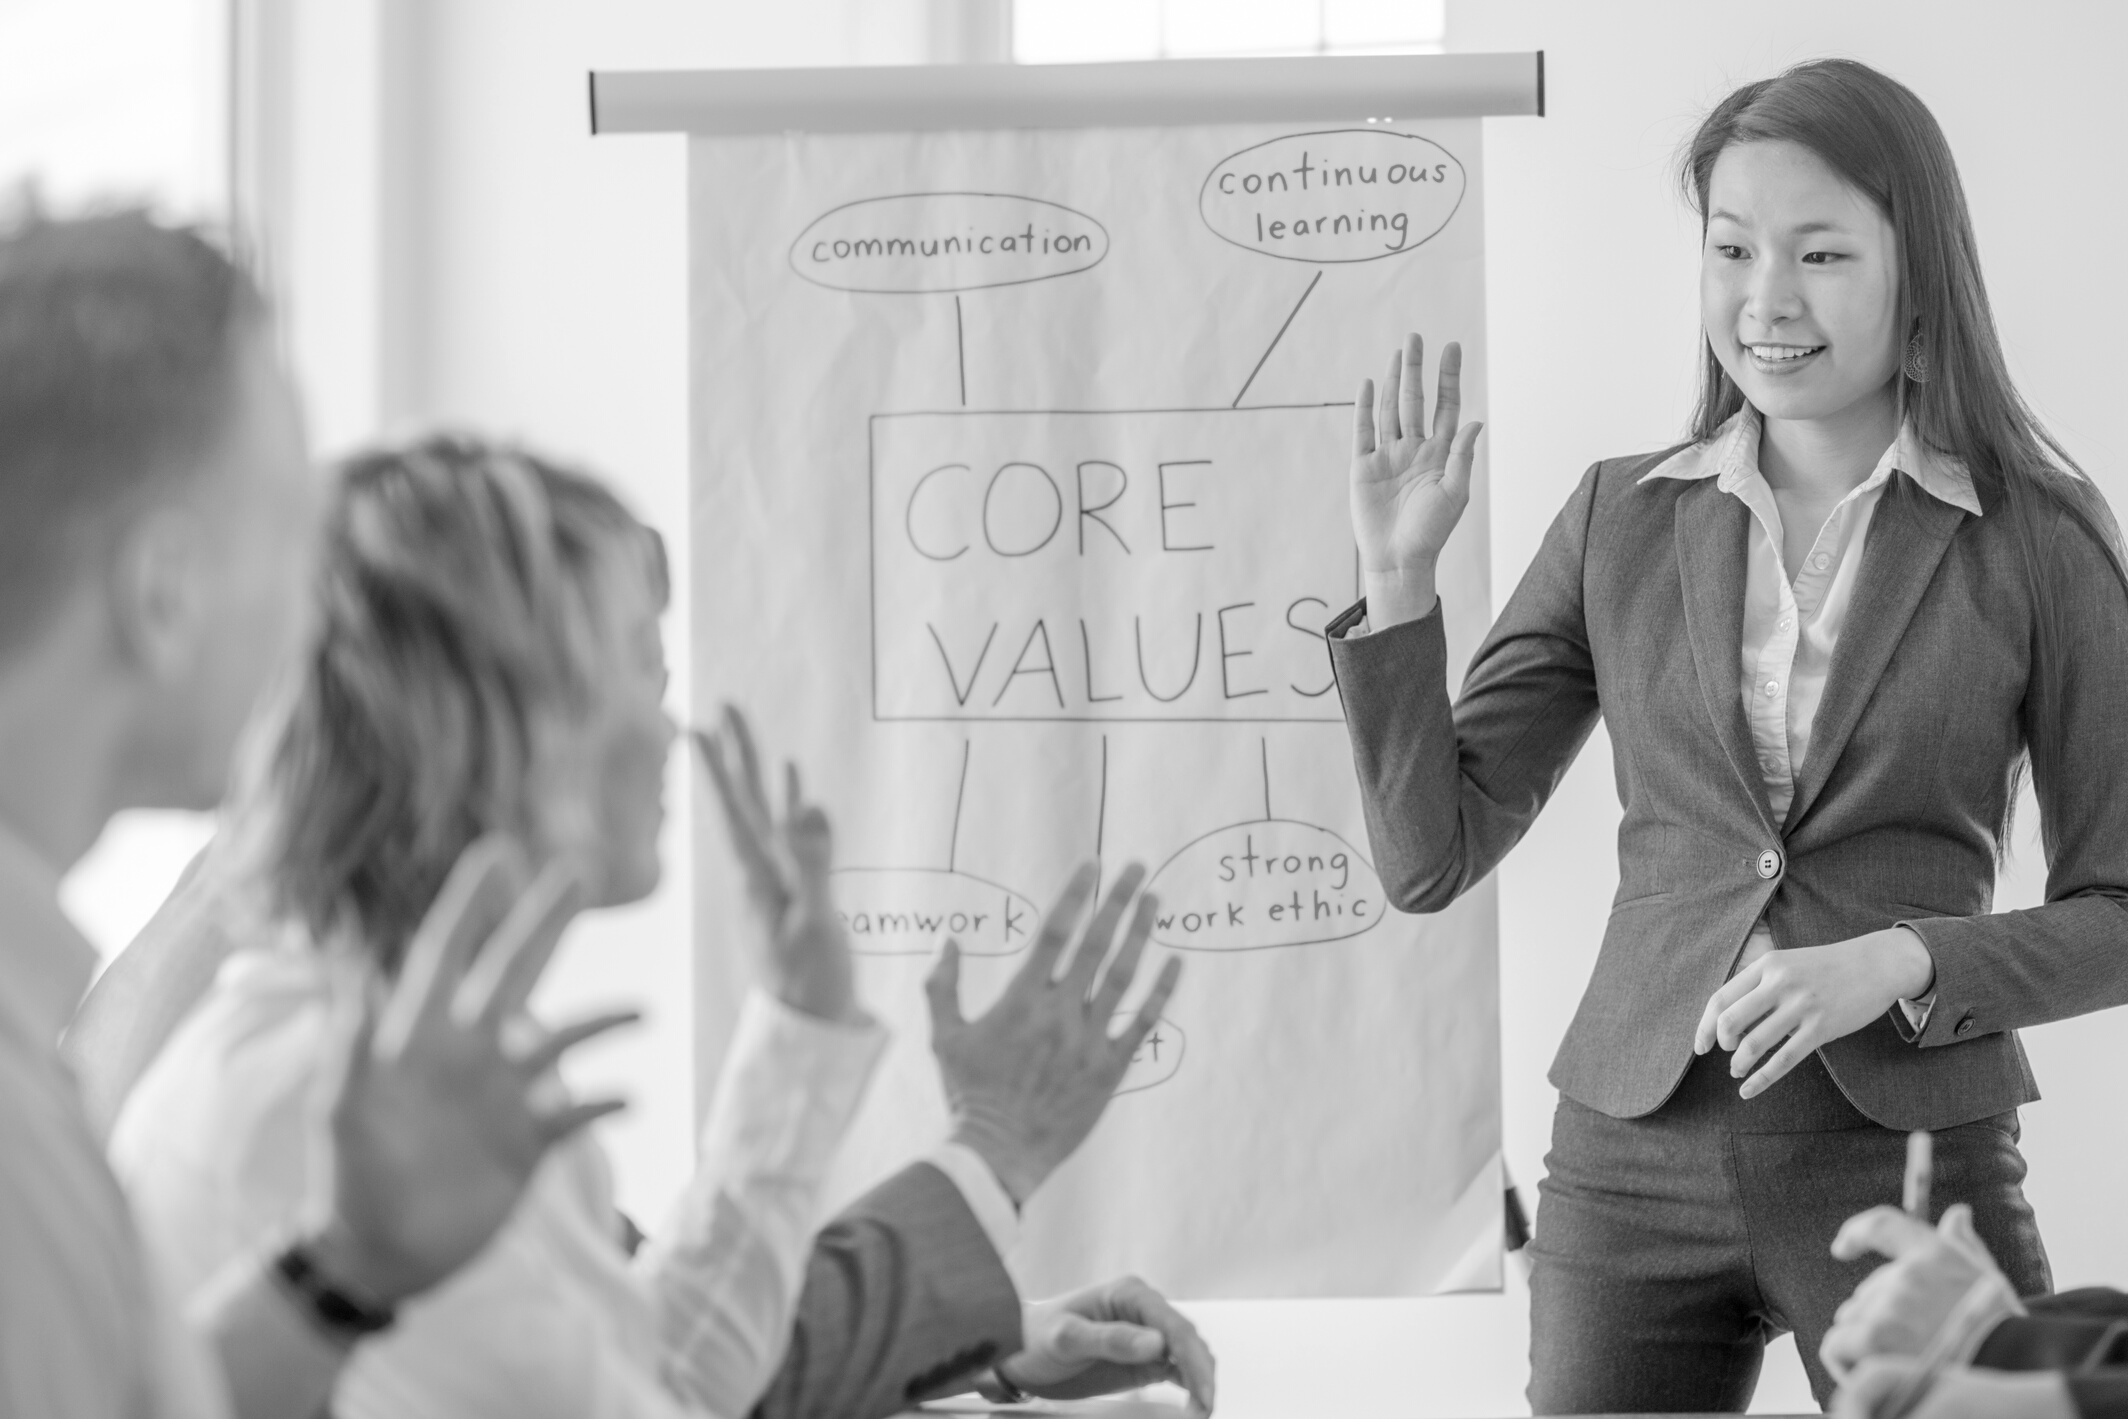 Discussing the Companies Core Values